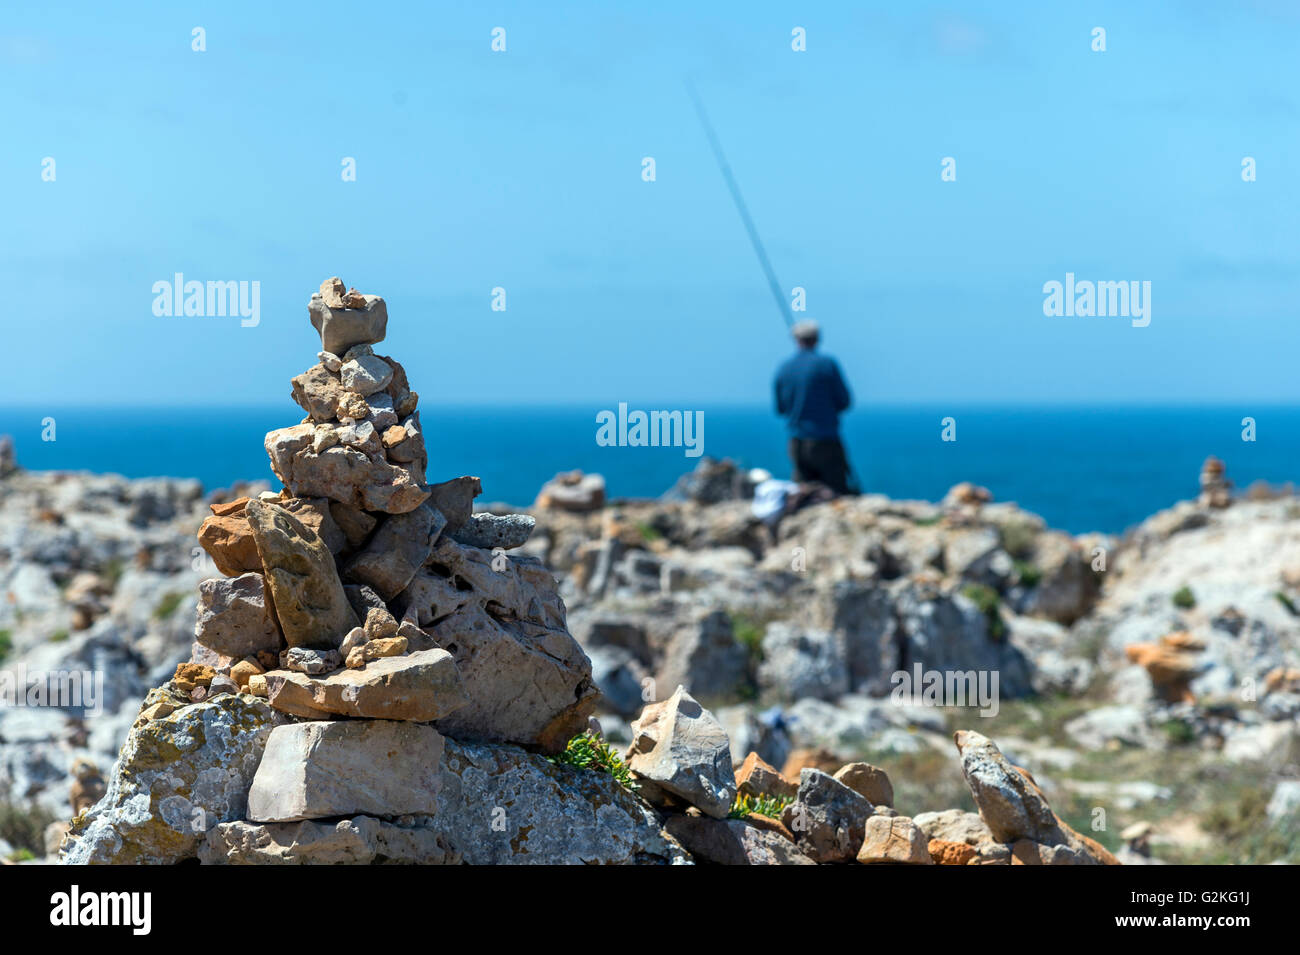 Portugal, Algarve, Sagres, cairn at coast, angler in the background Stock Photo